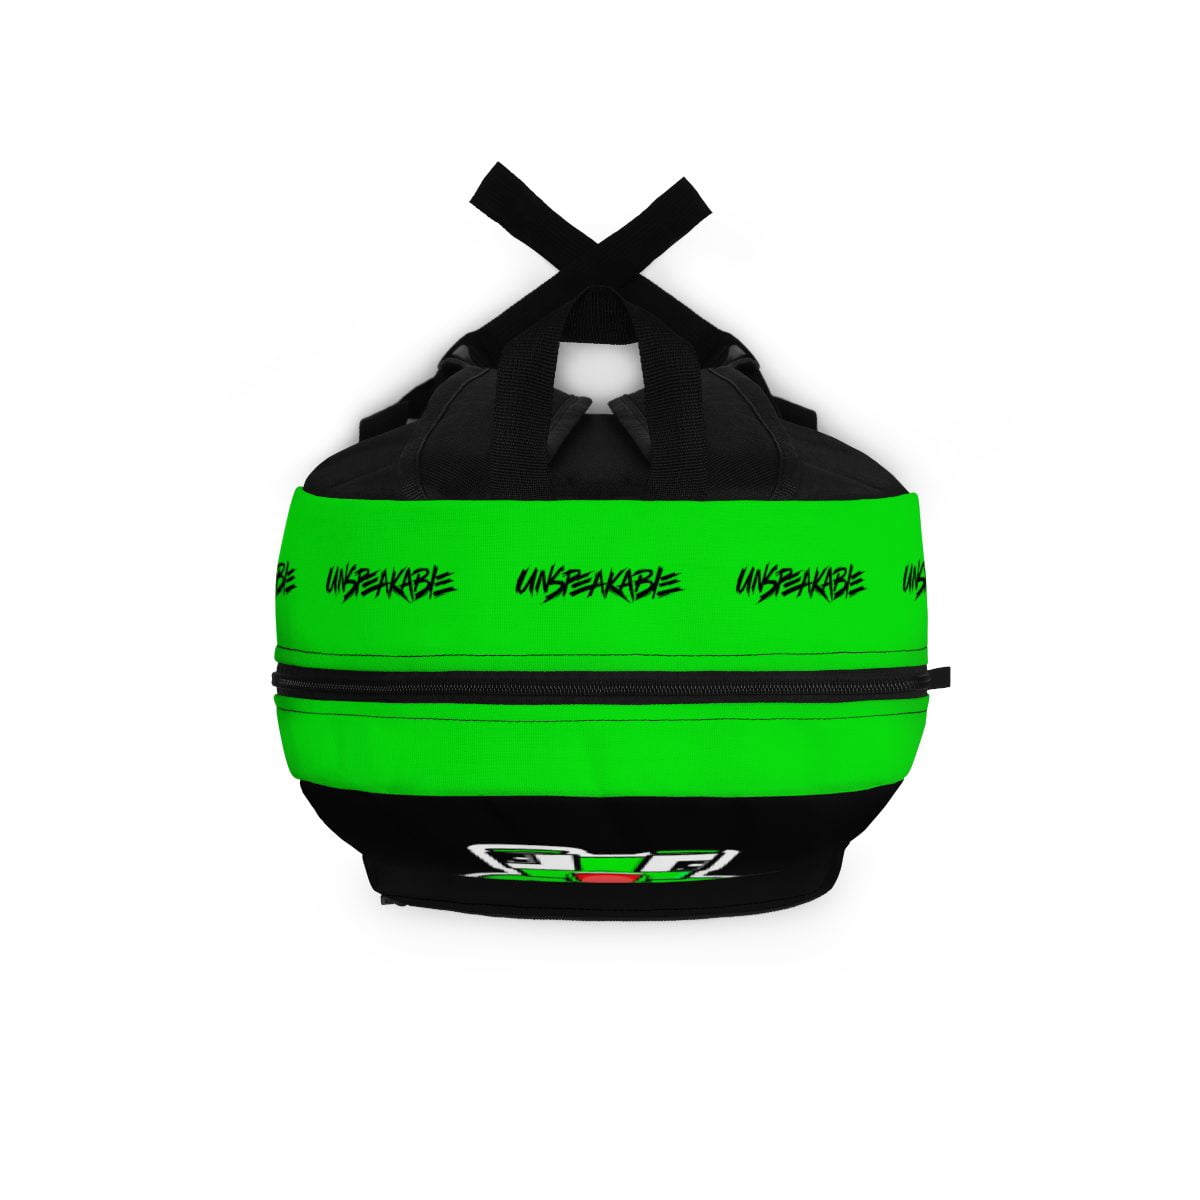 Unspeakable Gaming YouTube Channel Backpack in Black and Neon Green Cool Kiddo 16